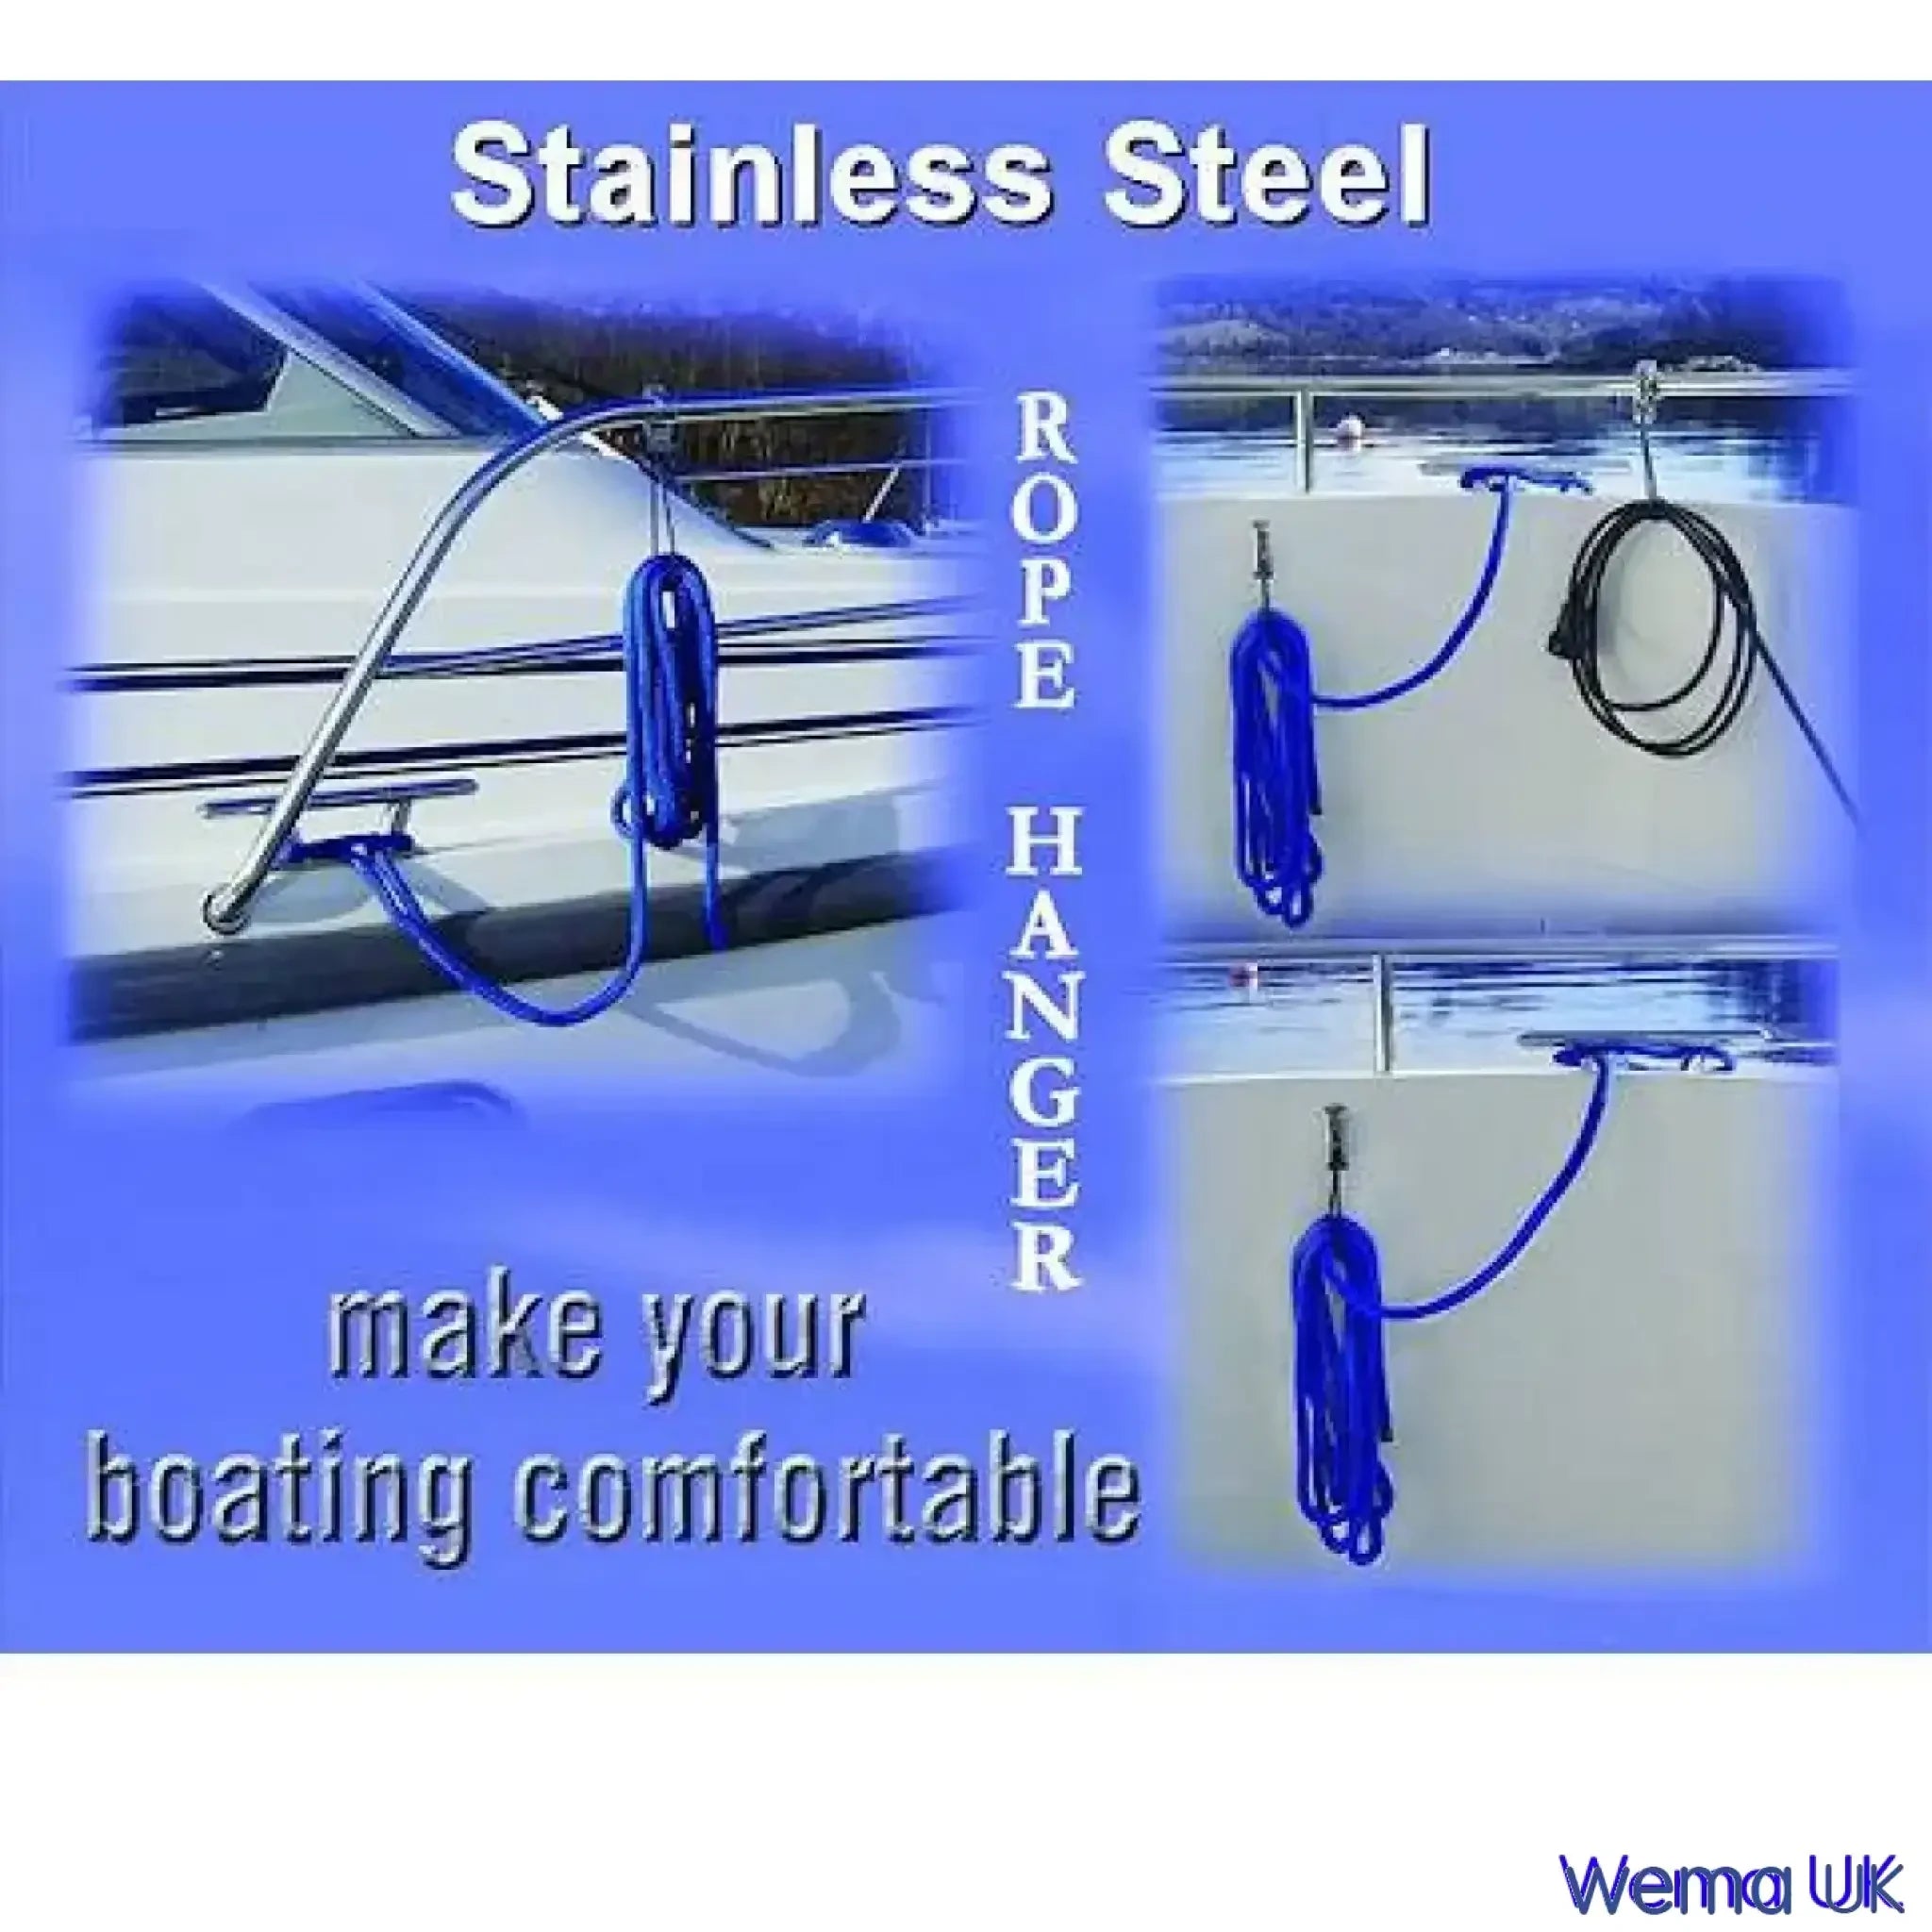 Universal Rope Hanger for Boats